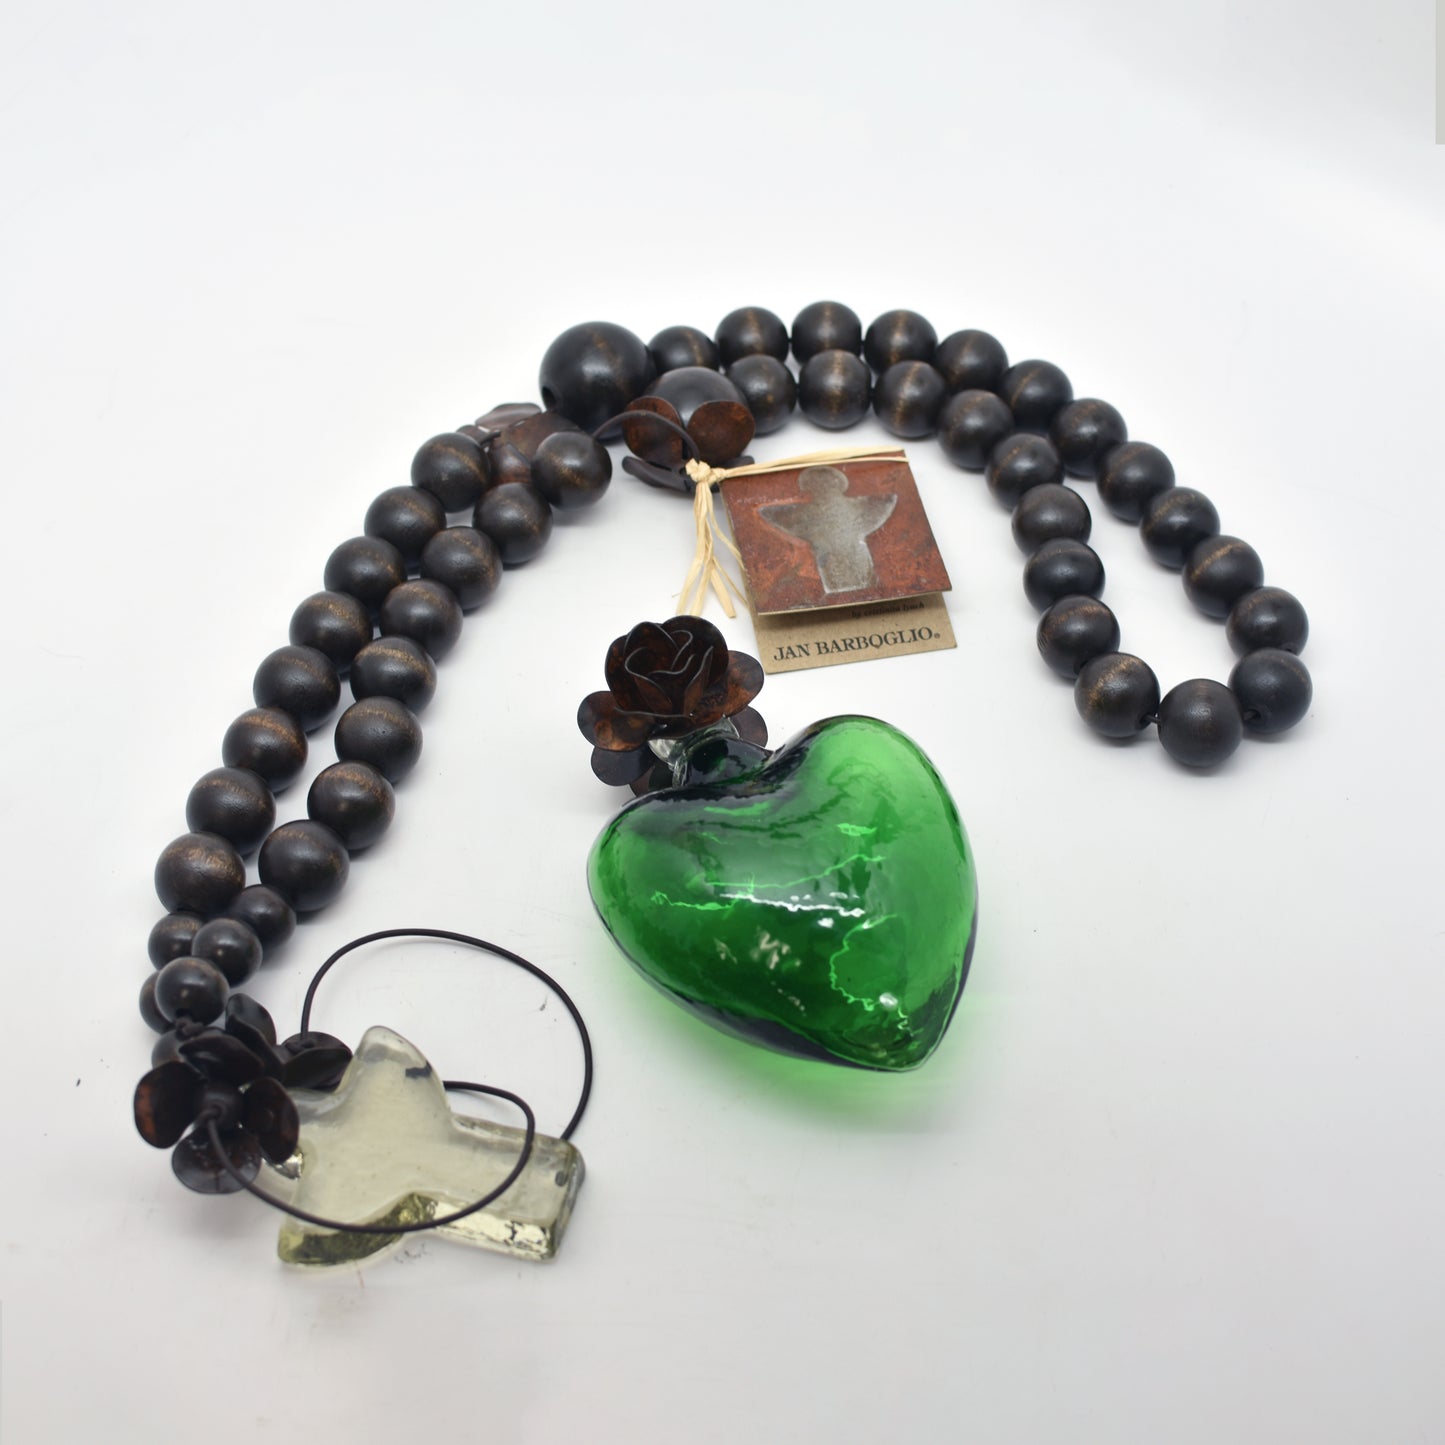 Corazon D'Melon Heartblessing in Green Glass